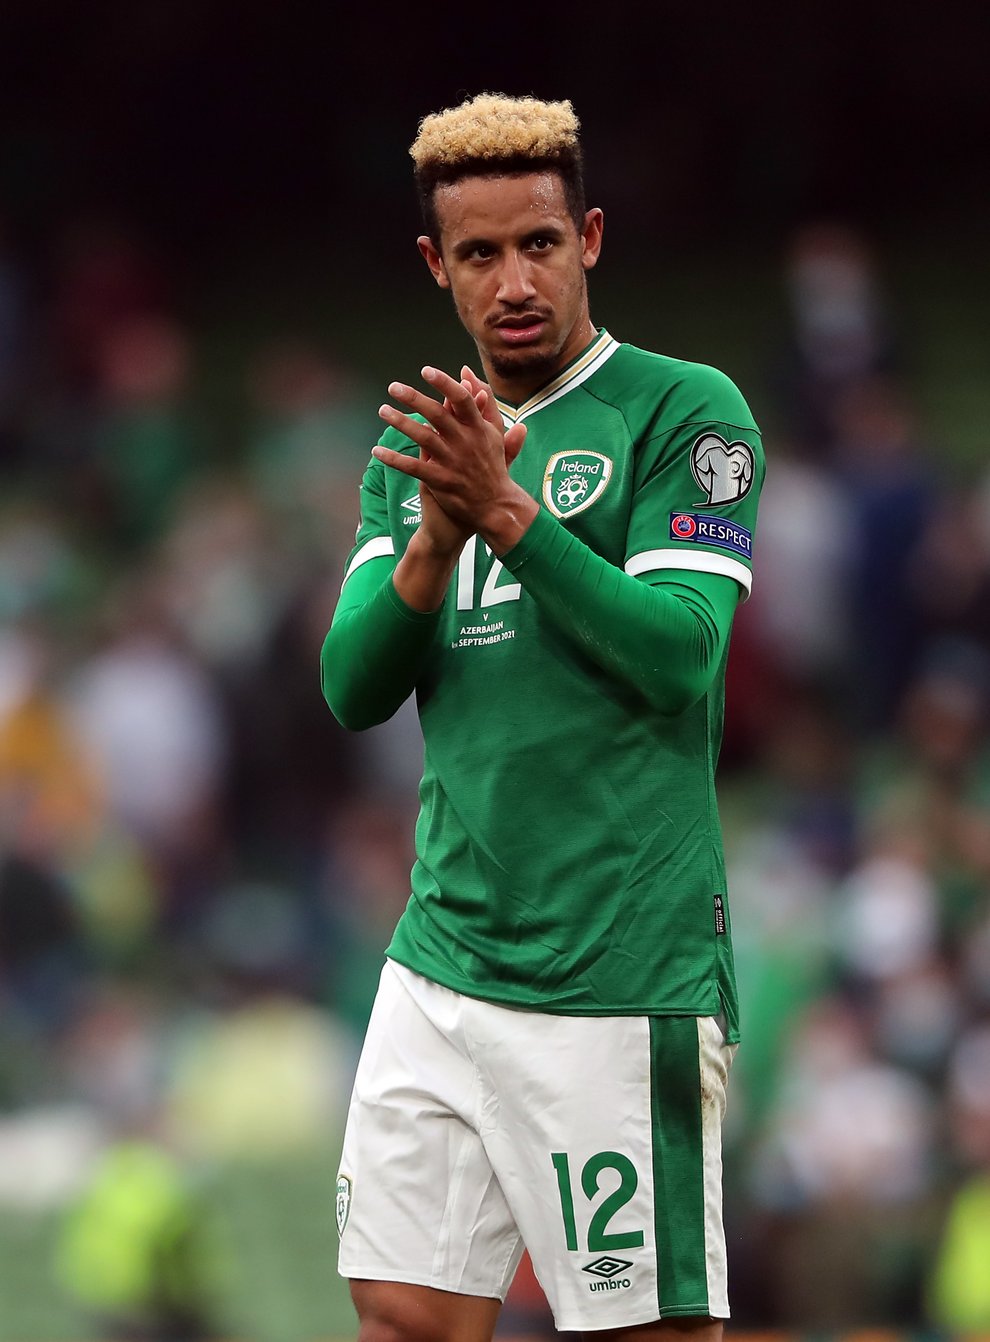 Republic of Ireland striker Callum Robinson has revealed he has not been vaccinated against Covid-19 (Niall Carson/PA)